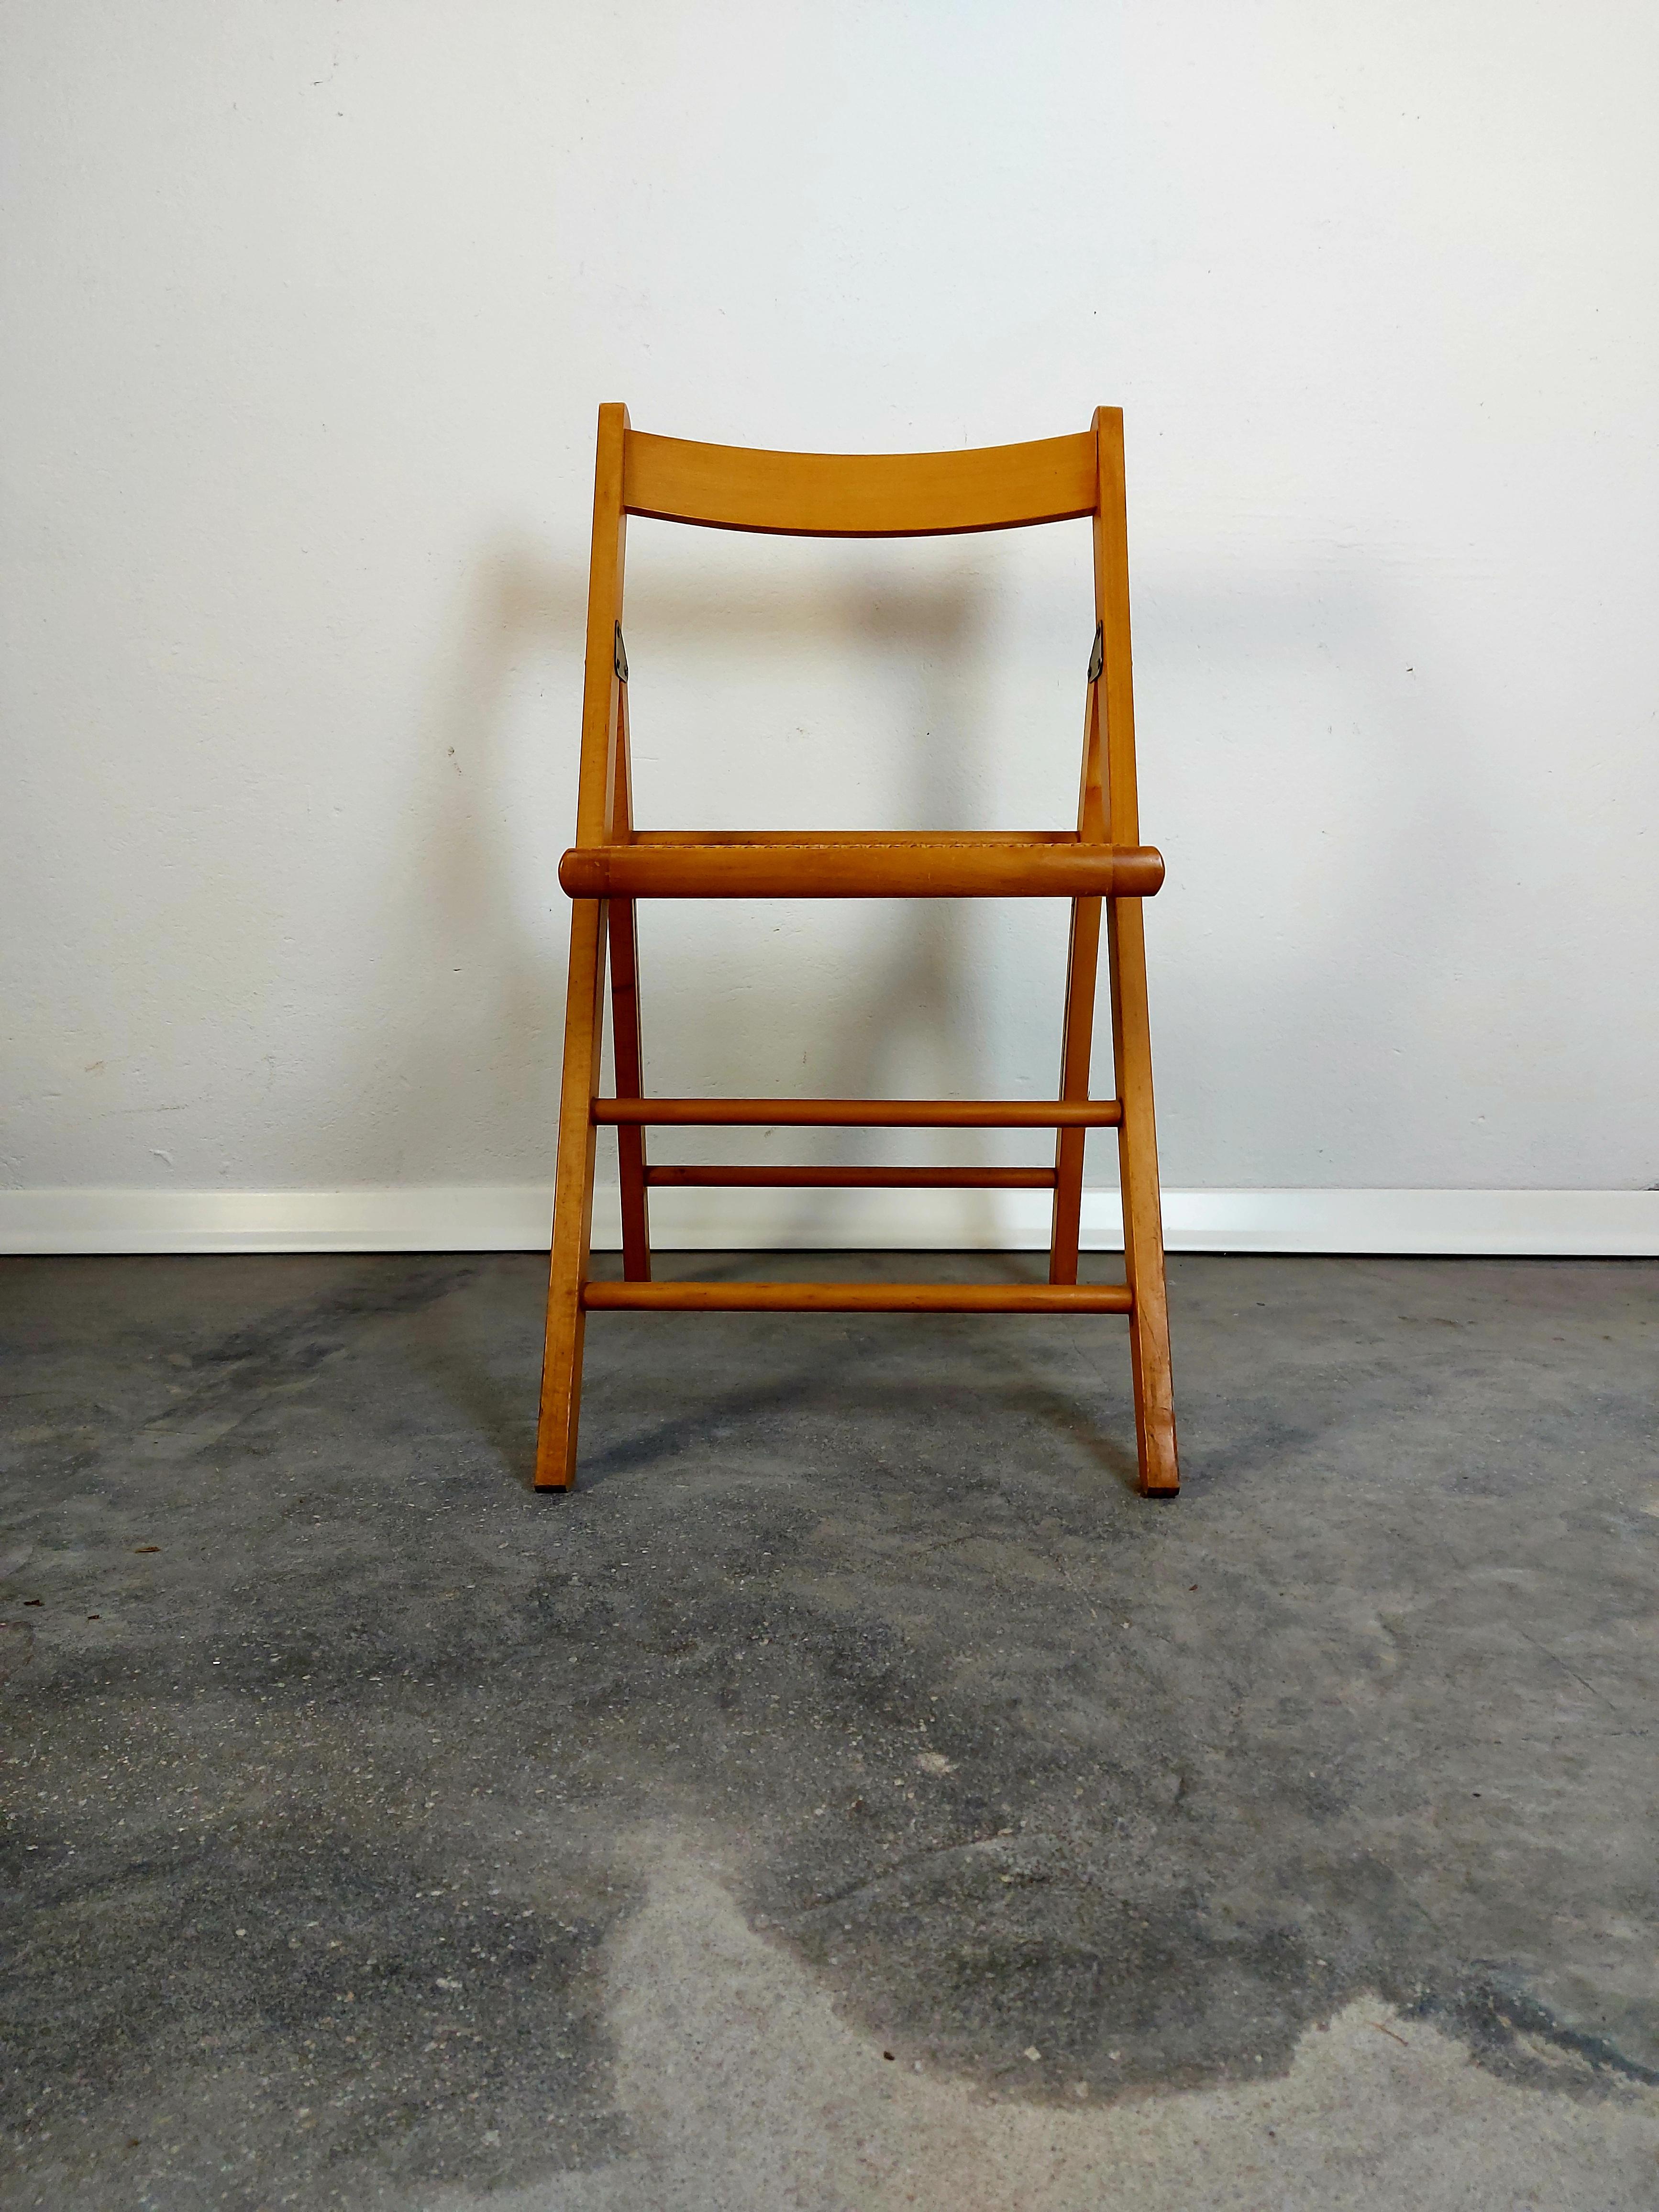 Folding chair

Period: 1980s

Manufacturer: Italy

Material: Hard wood, cane

Colour: Clear

Condition: good original vintage condition, signs of use

dimensions: H = 75 cm, W = 43 cm, D = 38 cm, seat H = 43